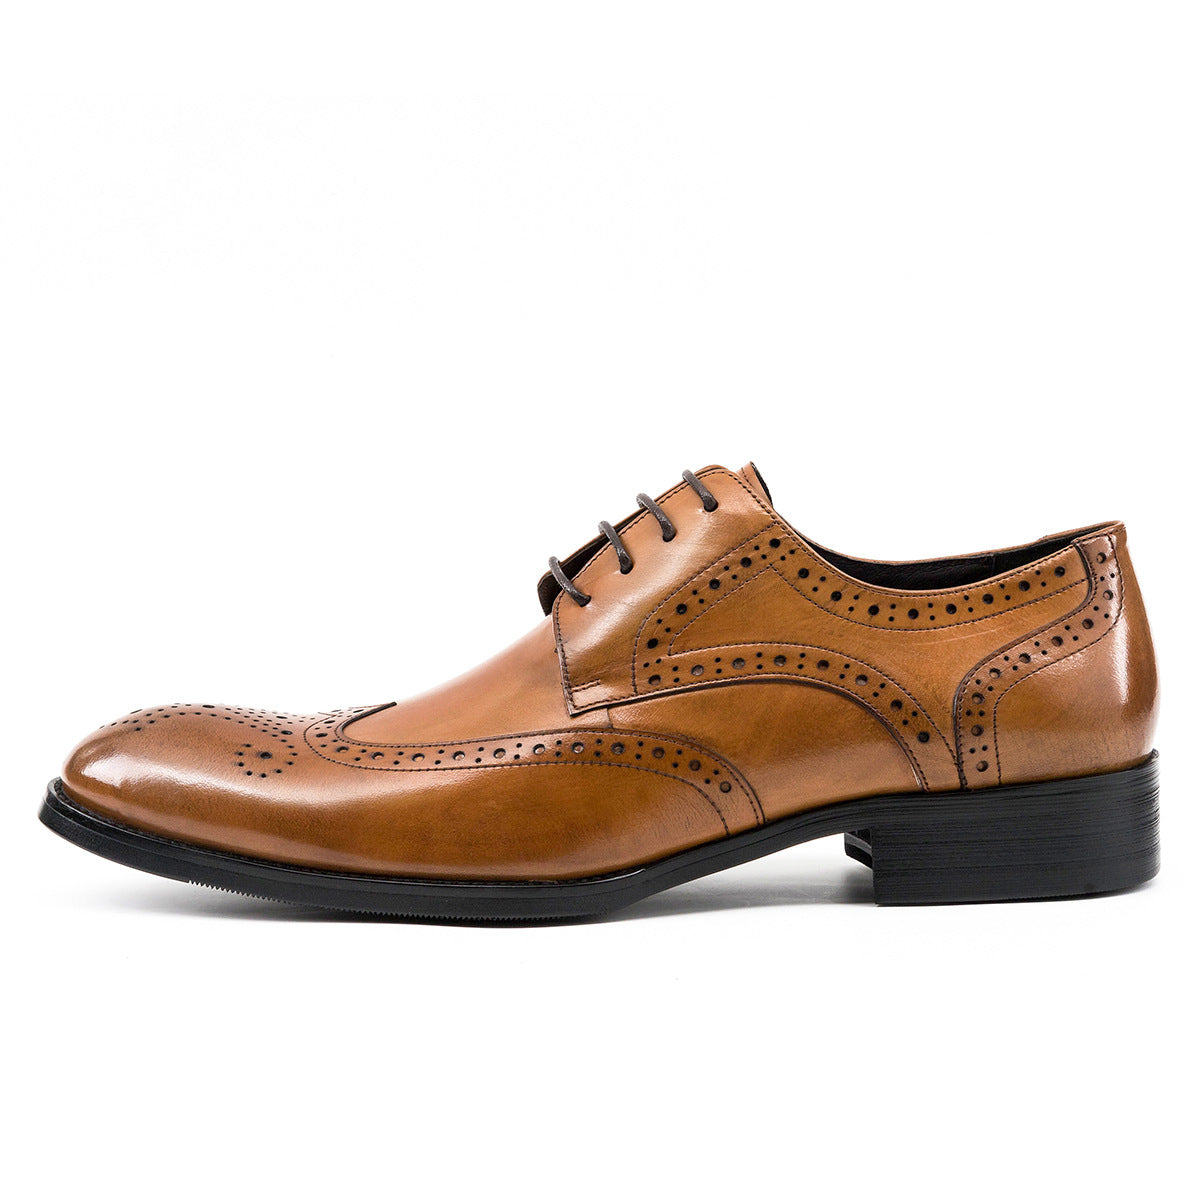 Classic Elegant Men's Brogue British Carved Leather Shoes